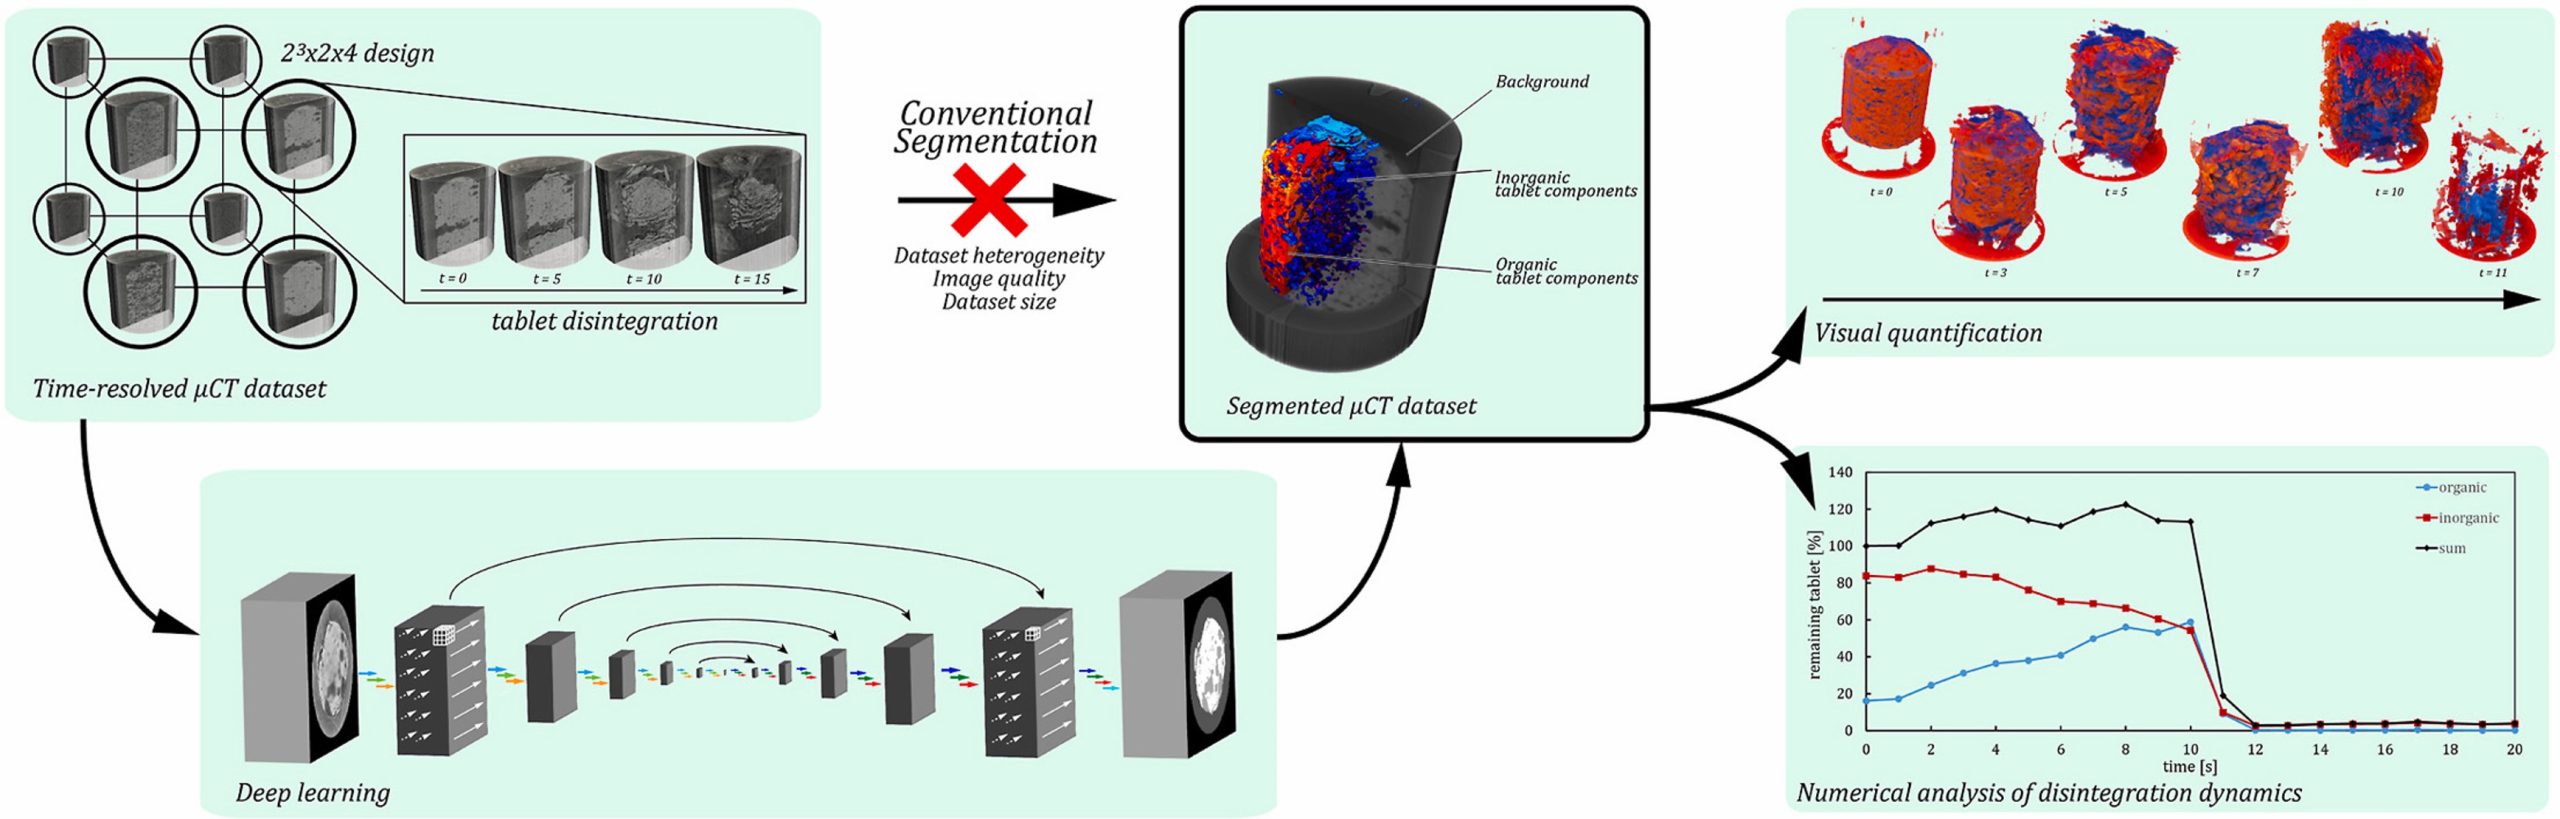 Advanced analysis of disintegrating pharmaceutical compacts using deep learning-based segmentation of time-resolved micro-tomography images